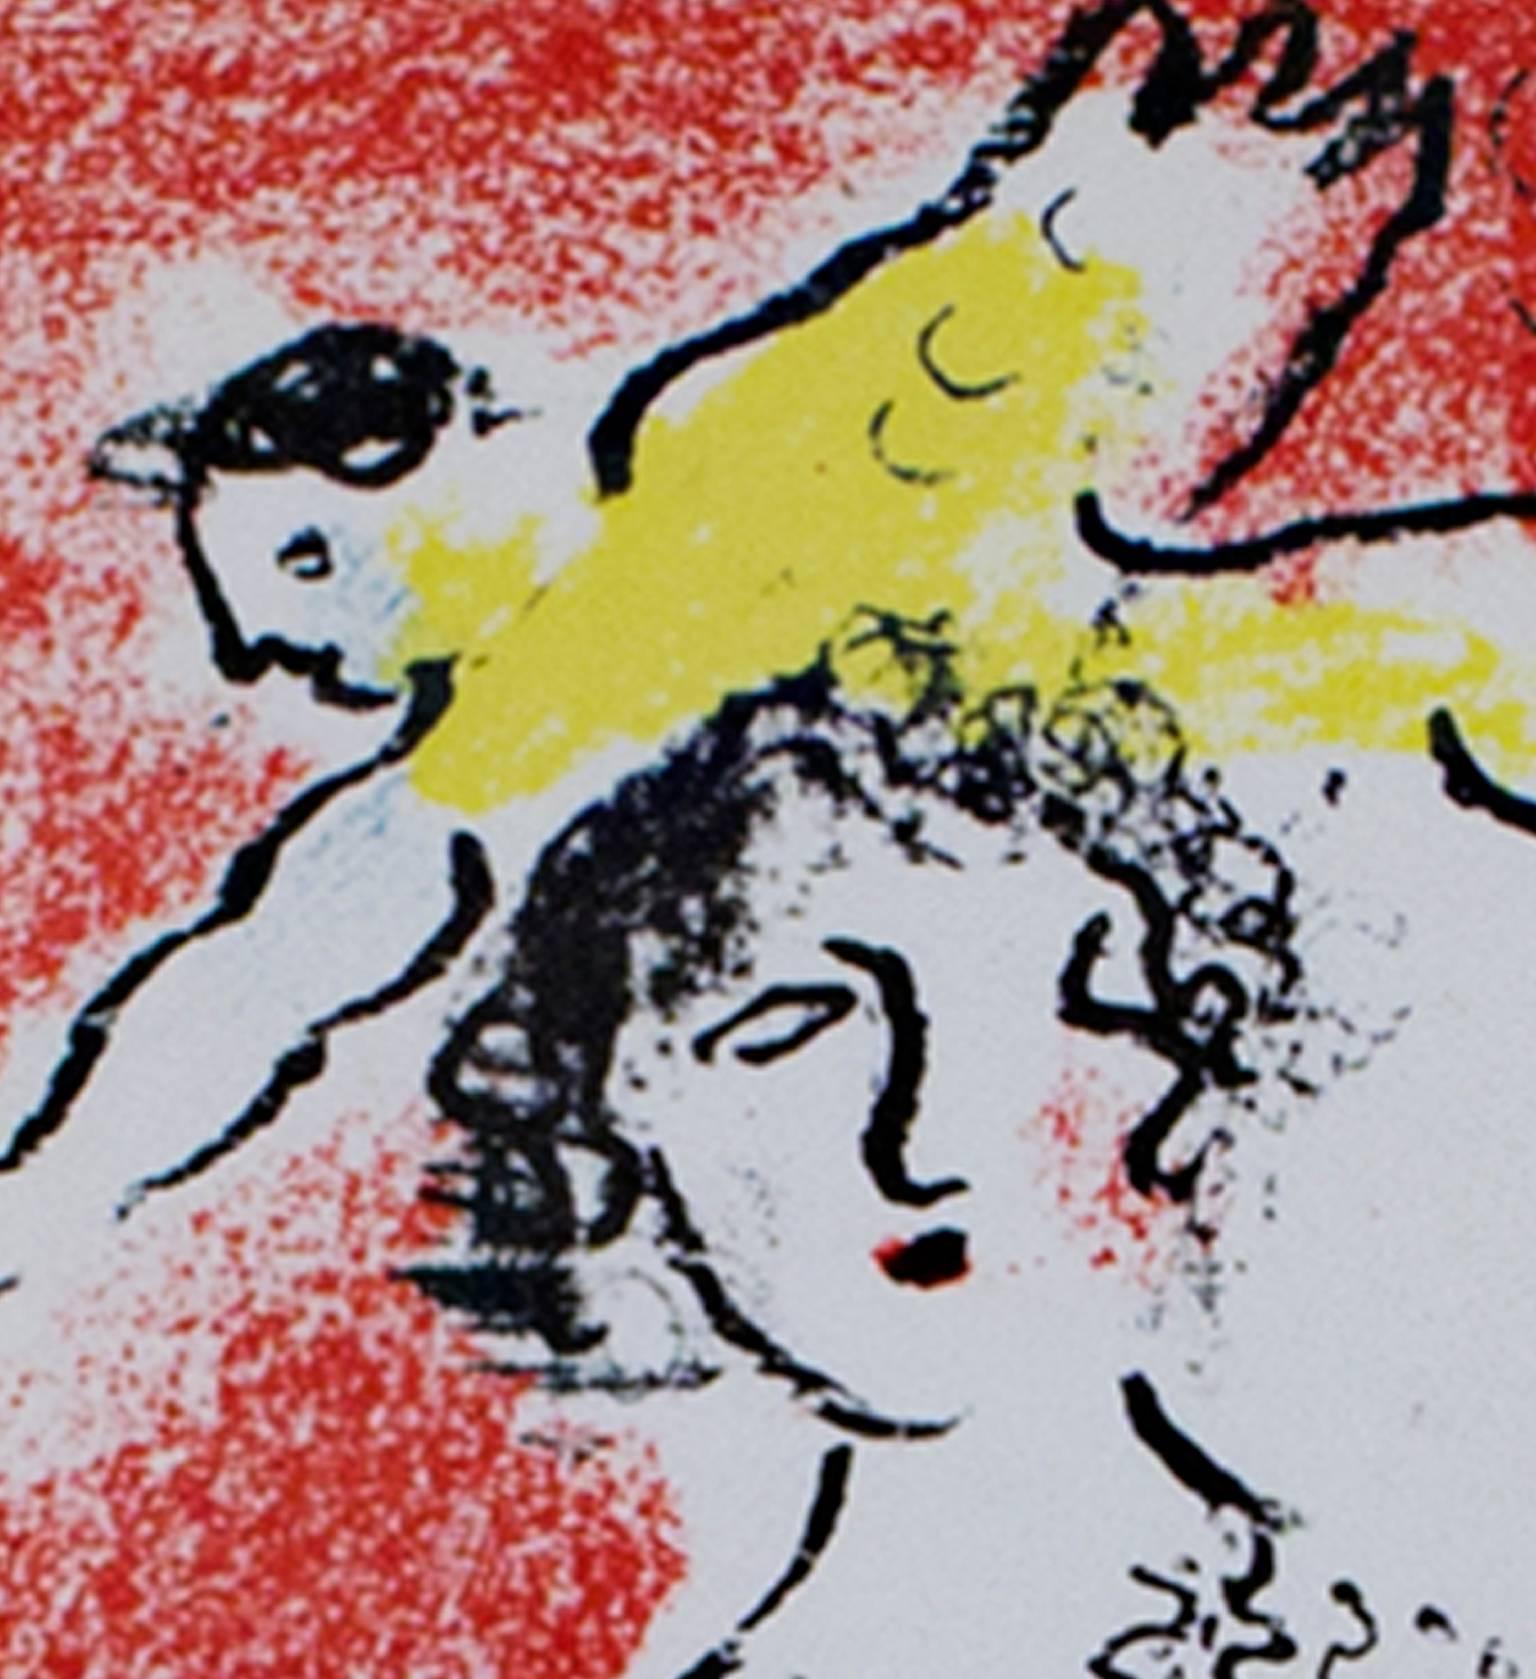 L'Atelier Mourlot Cover - Gray Figurative Print by Marc Chagall